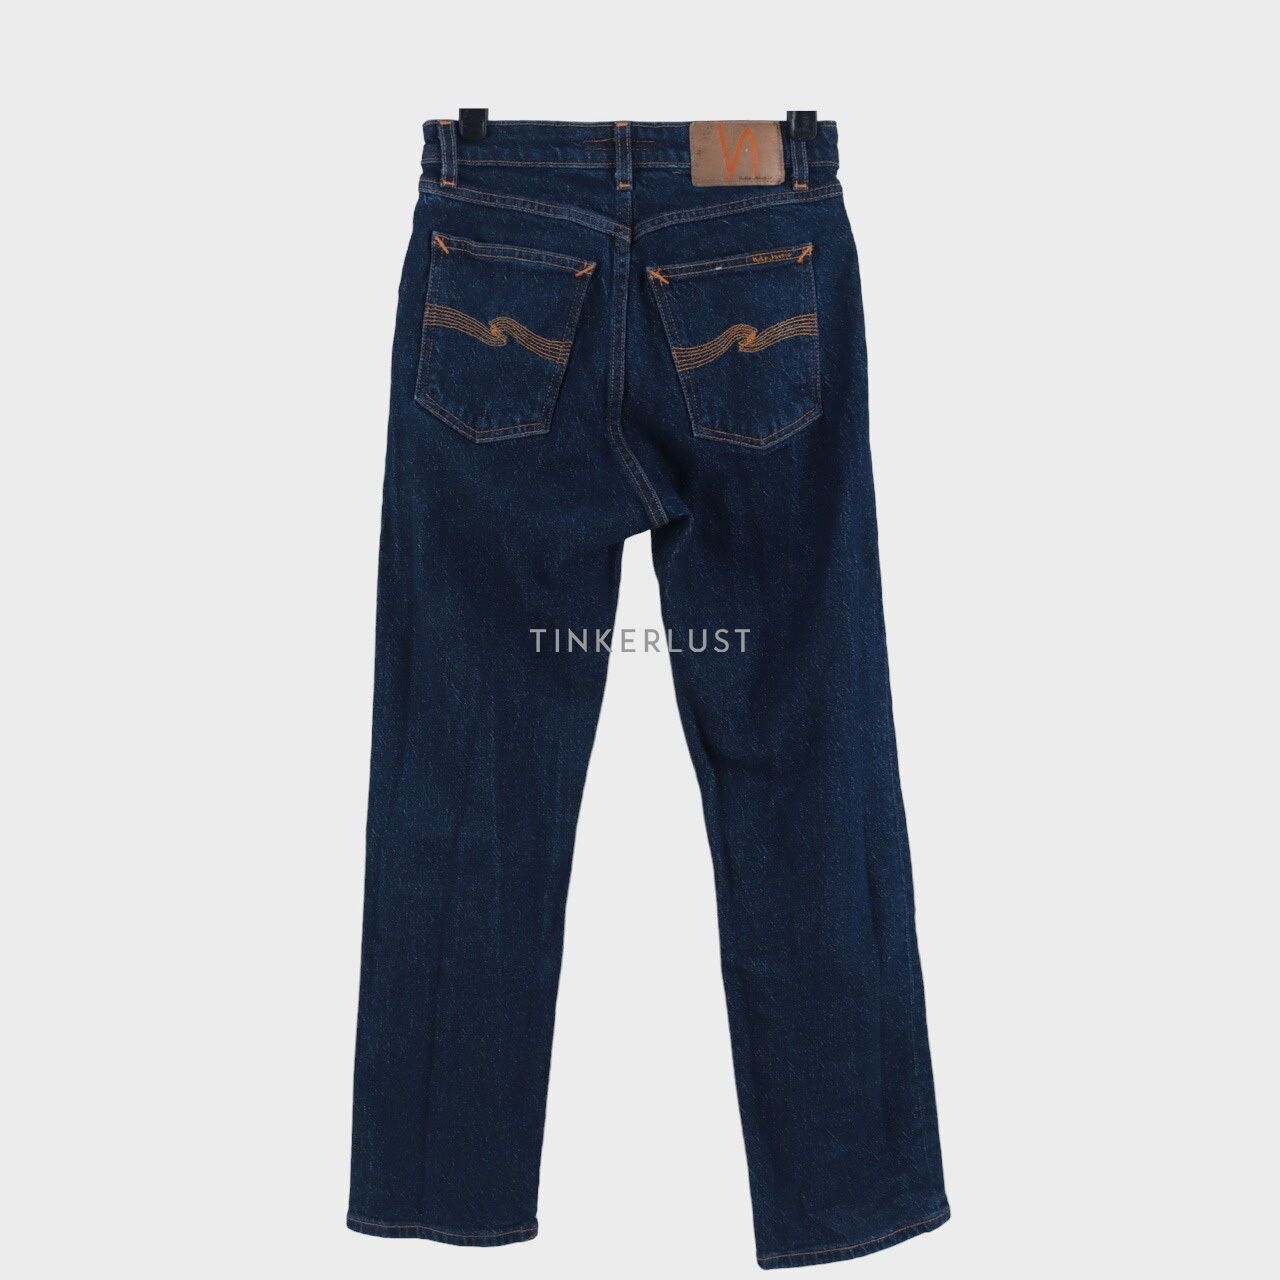 Nudie Jeans Straight Sally Jeans